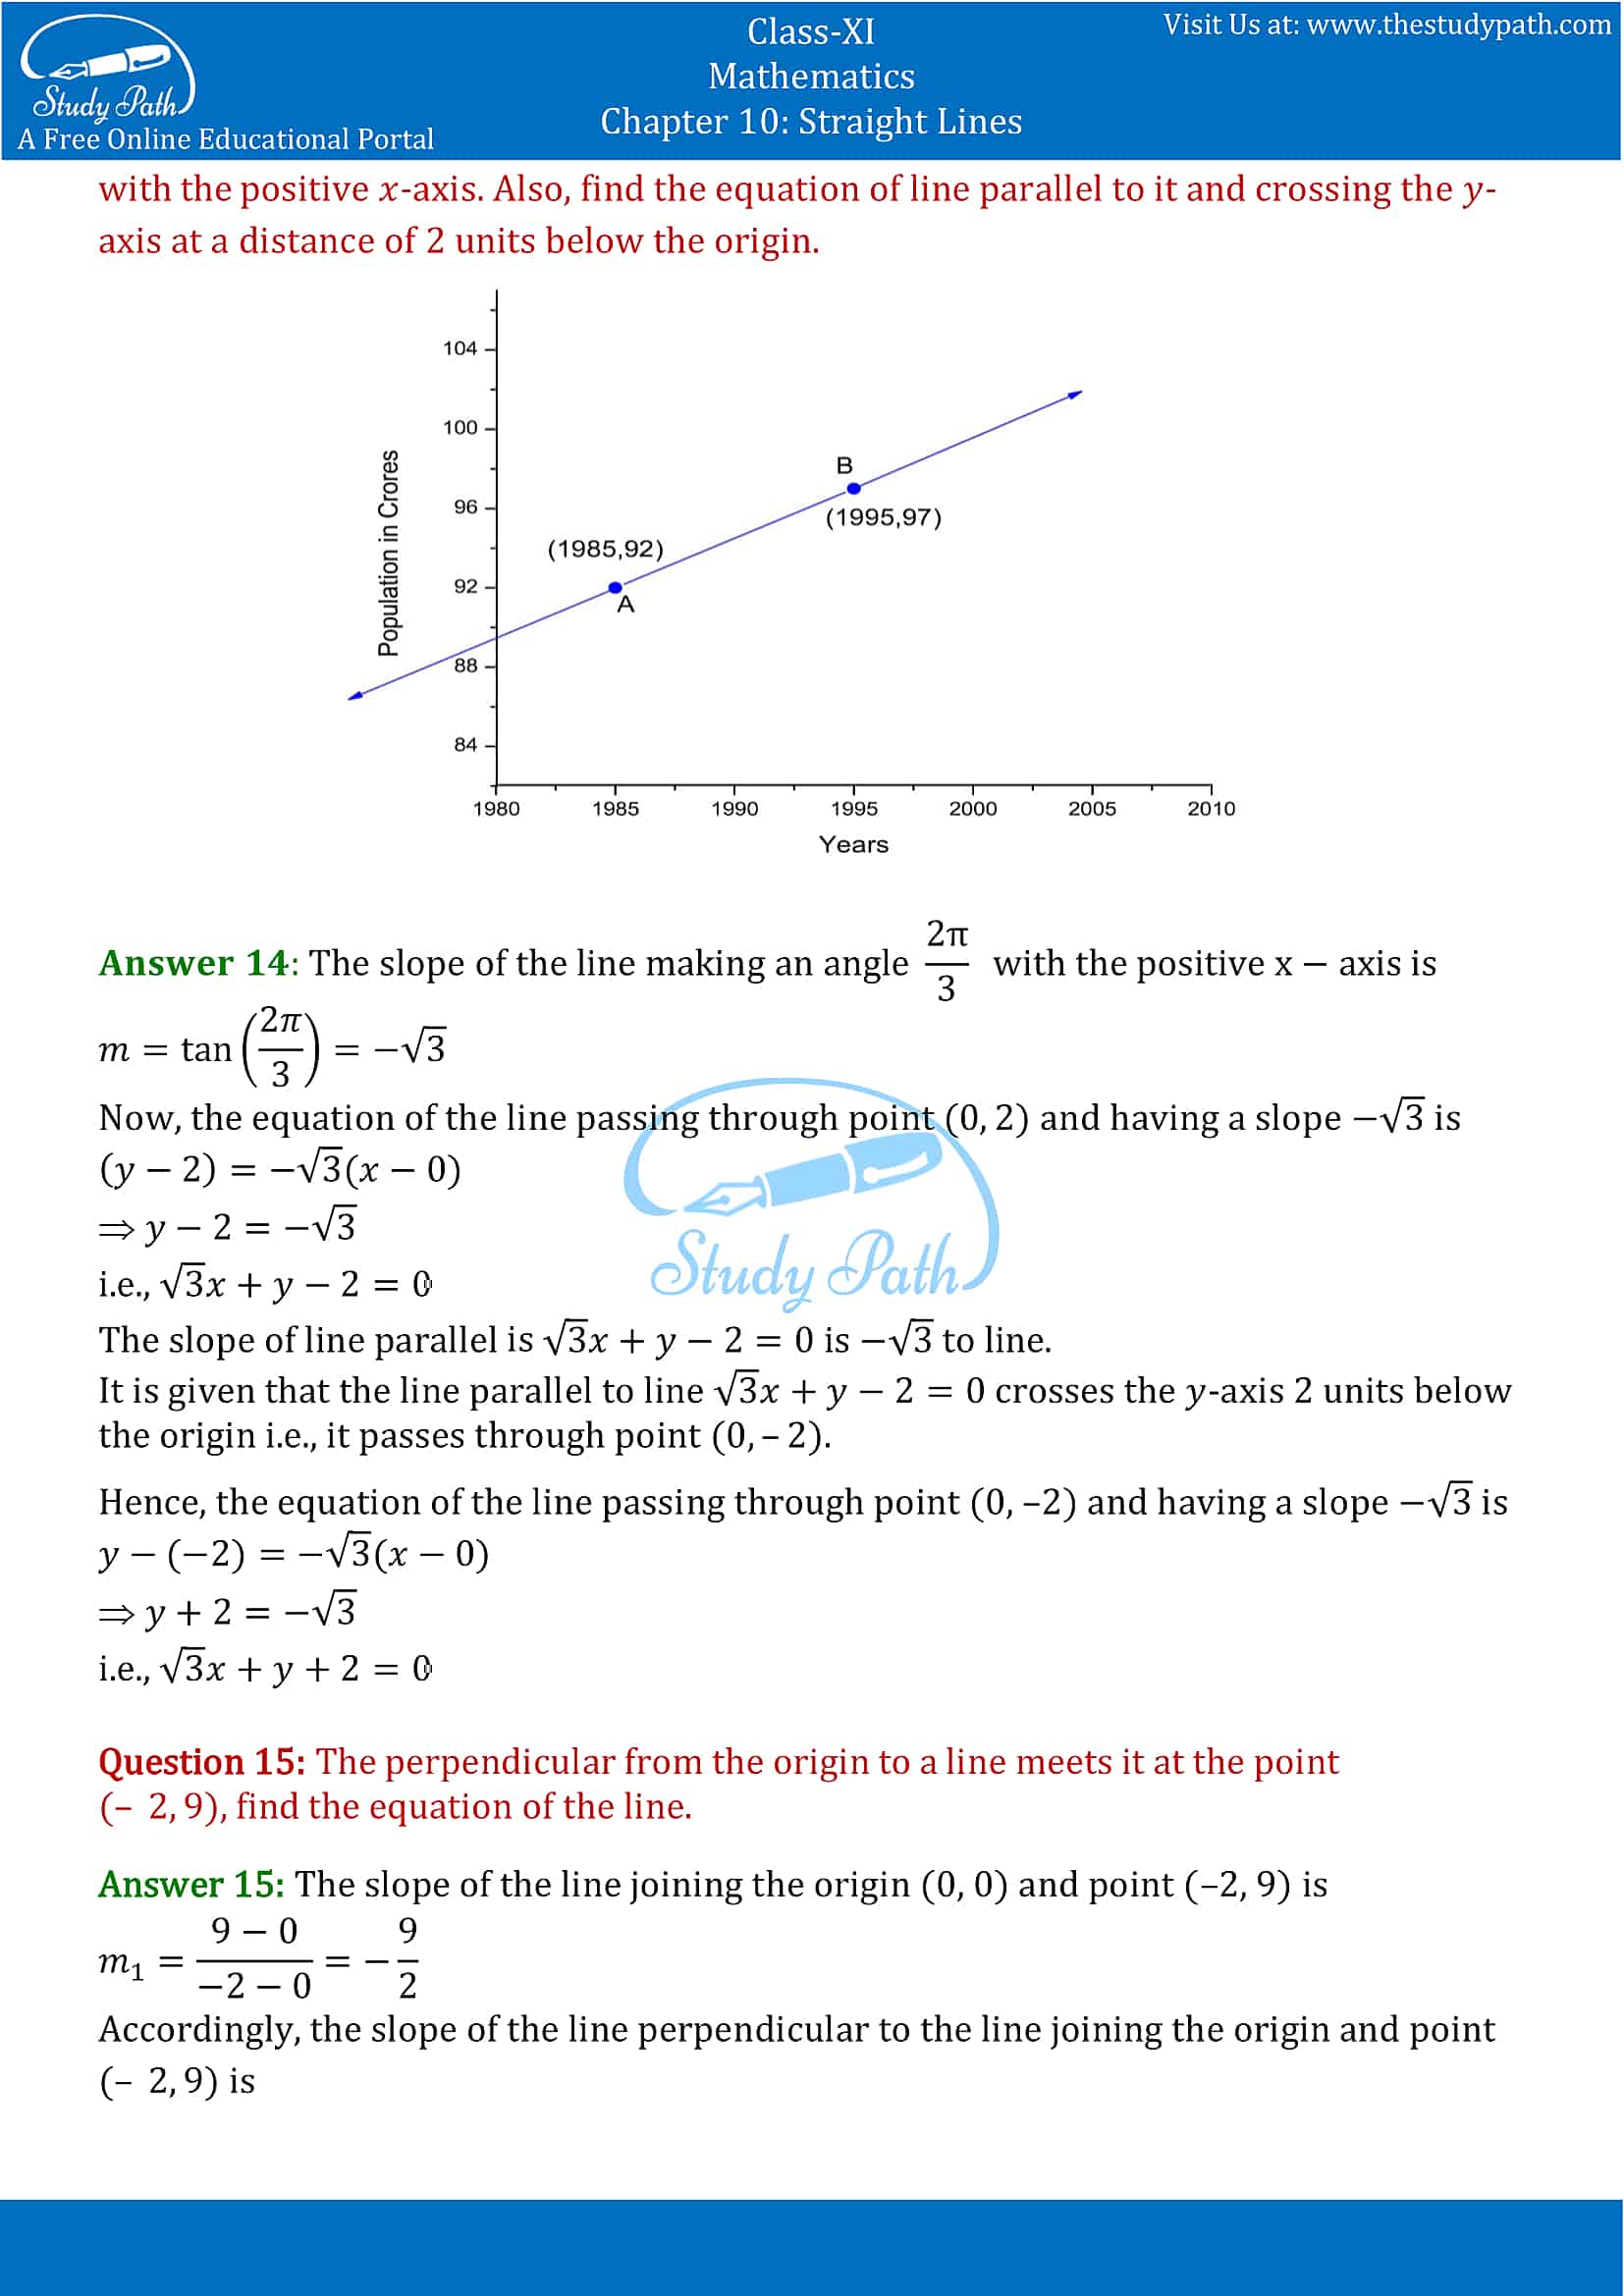 NCERT Solutions for Class 11 Maths chapter 10 Straight Lines Exercise 10.2 Part-7